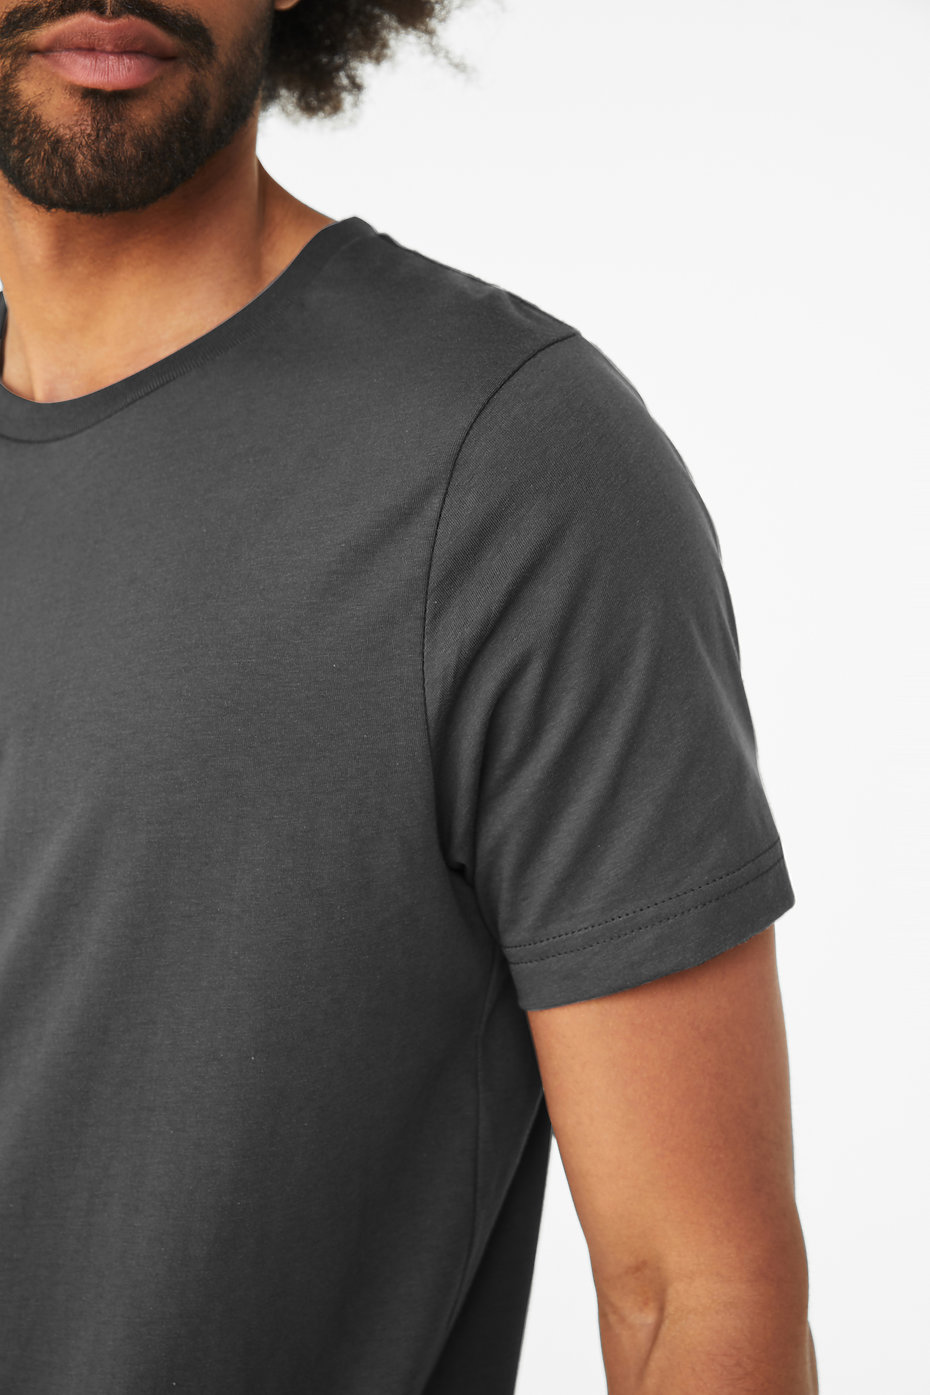 32 Best T-Shirts for Men in 2023: Basic T-Shirts, Workout T-Shirts, Cheap  T-Shirts, & More